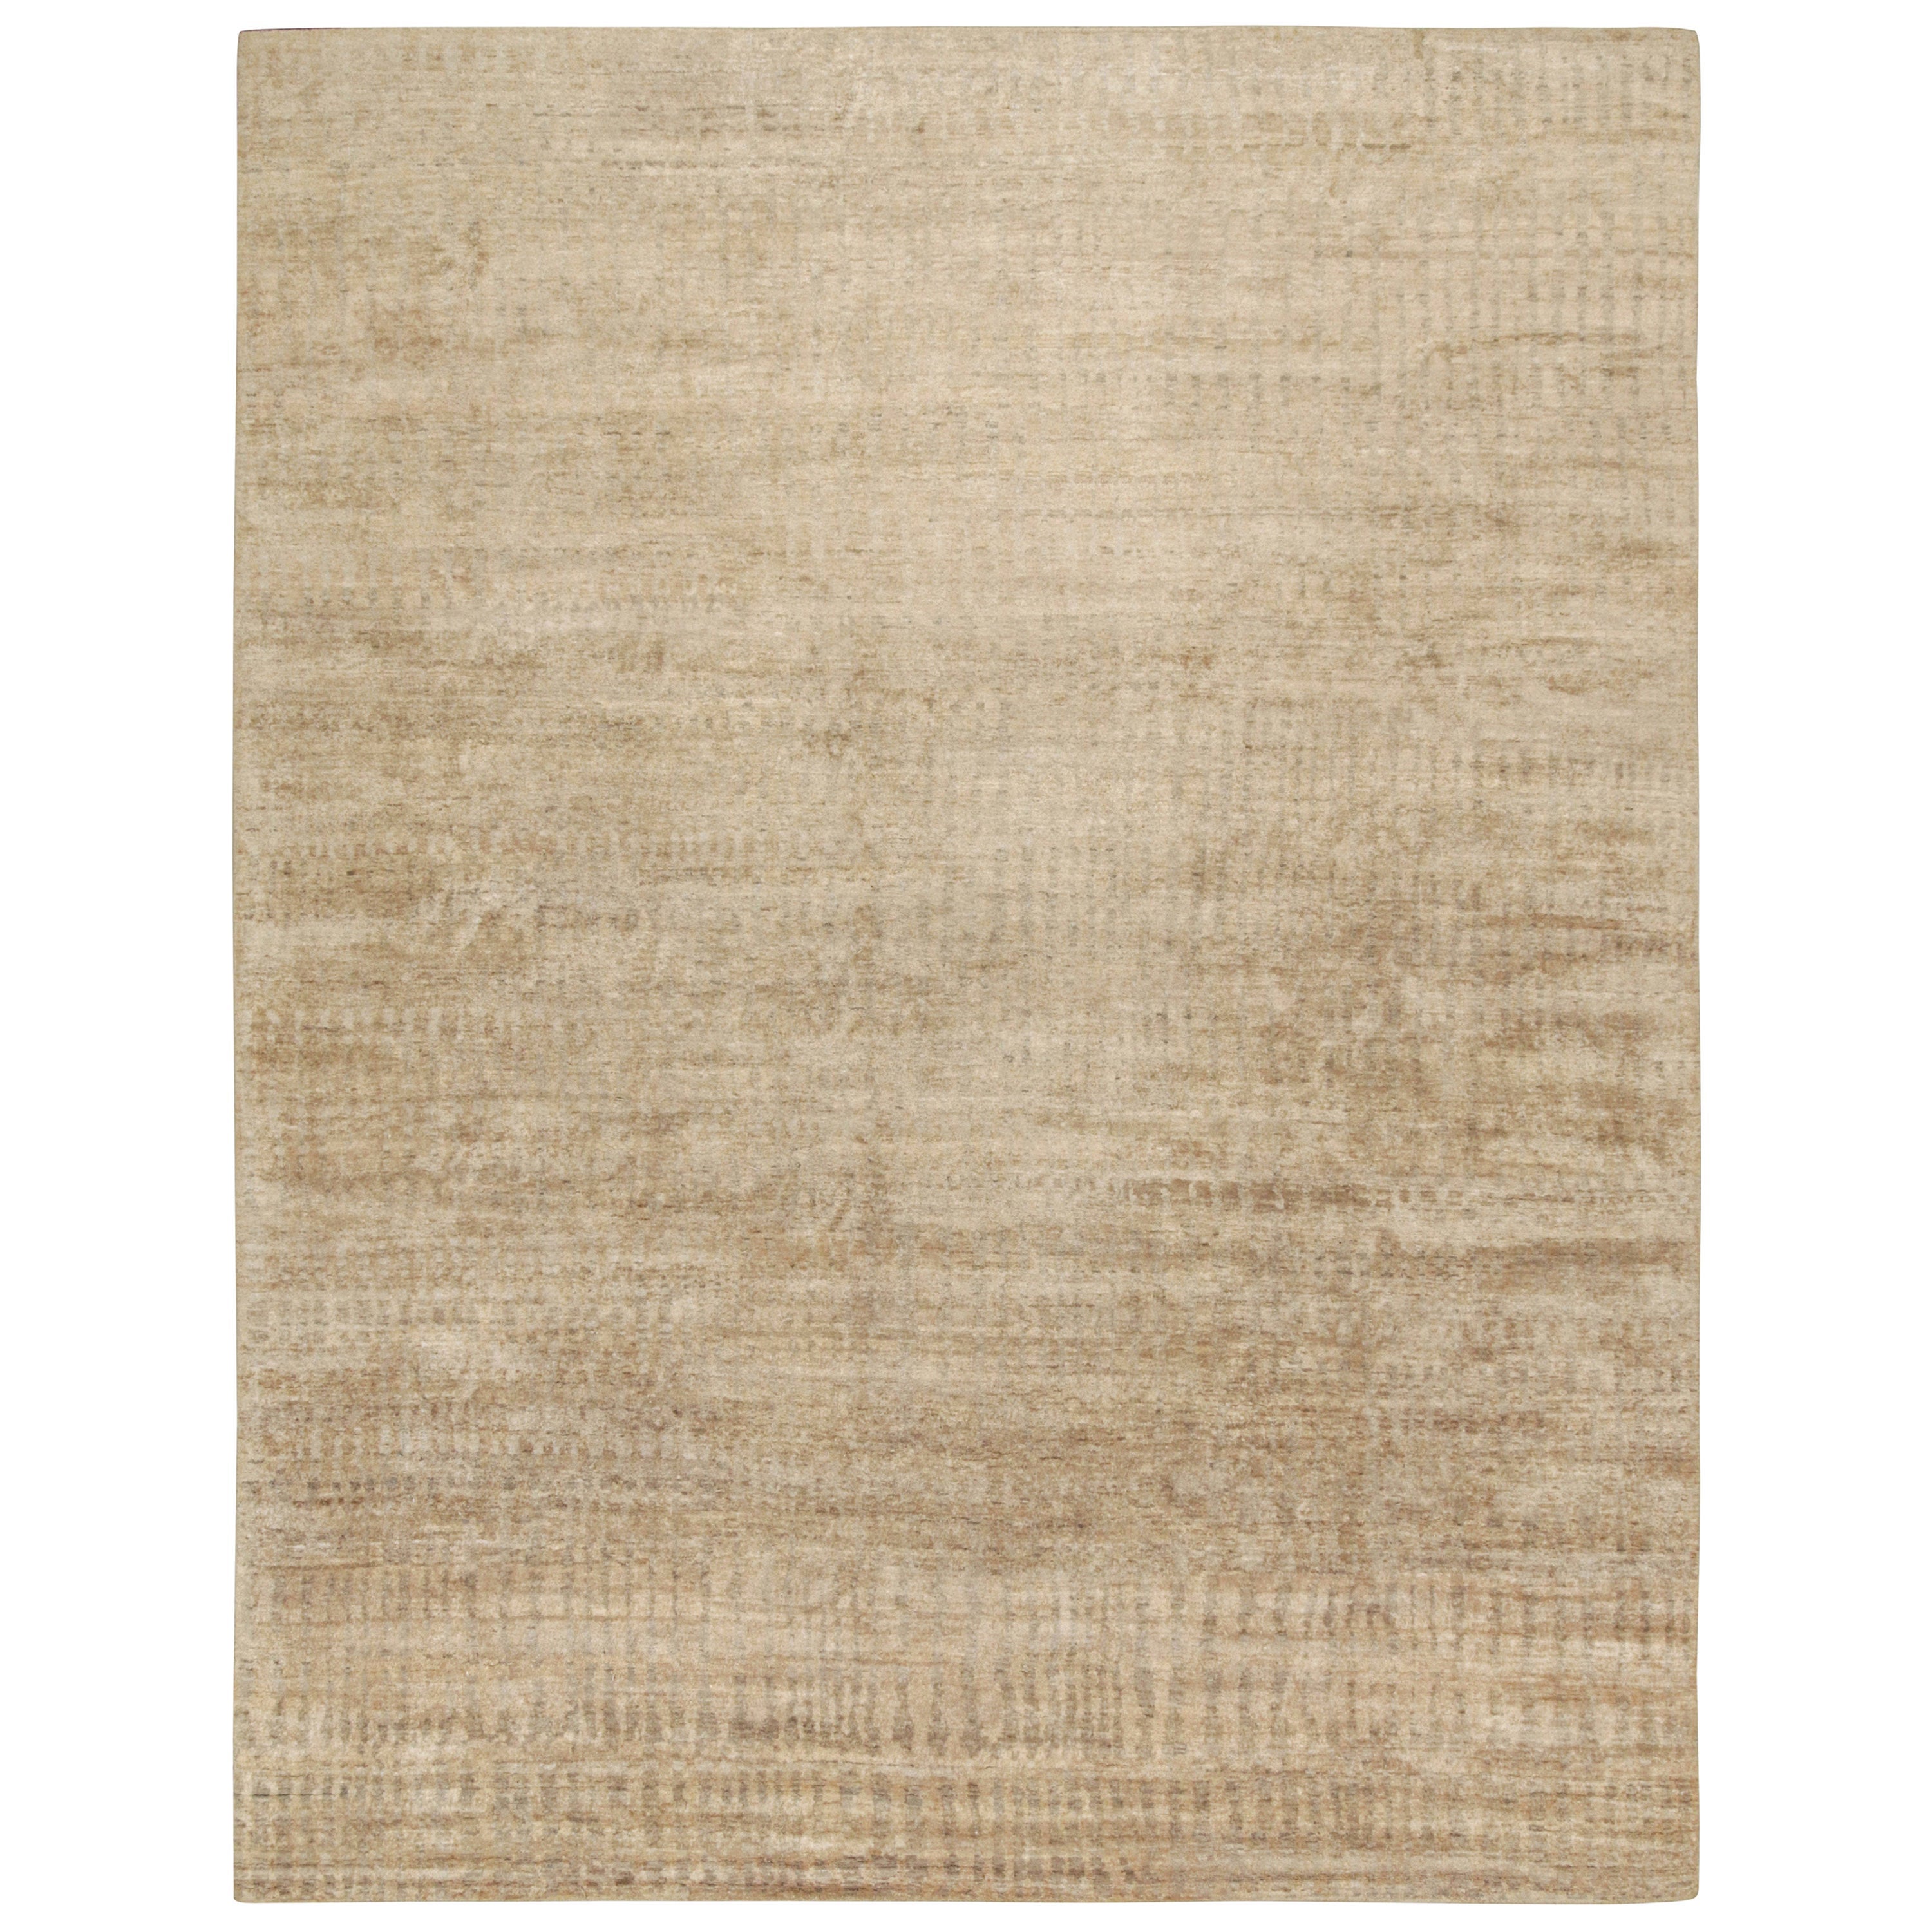 Rug & Kilim’s Contemporary Rug in Beige-Brown Tone-on-Tone Striae For Sale